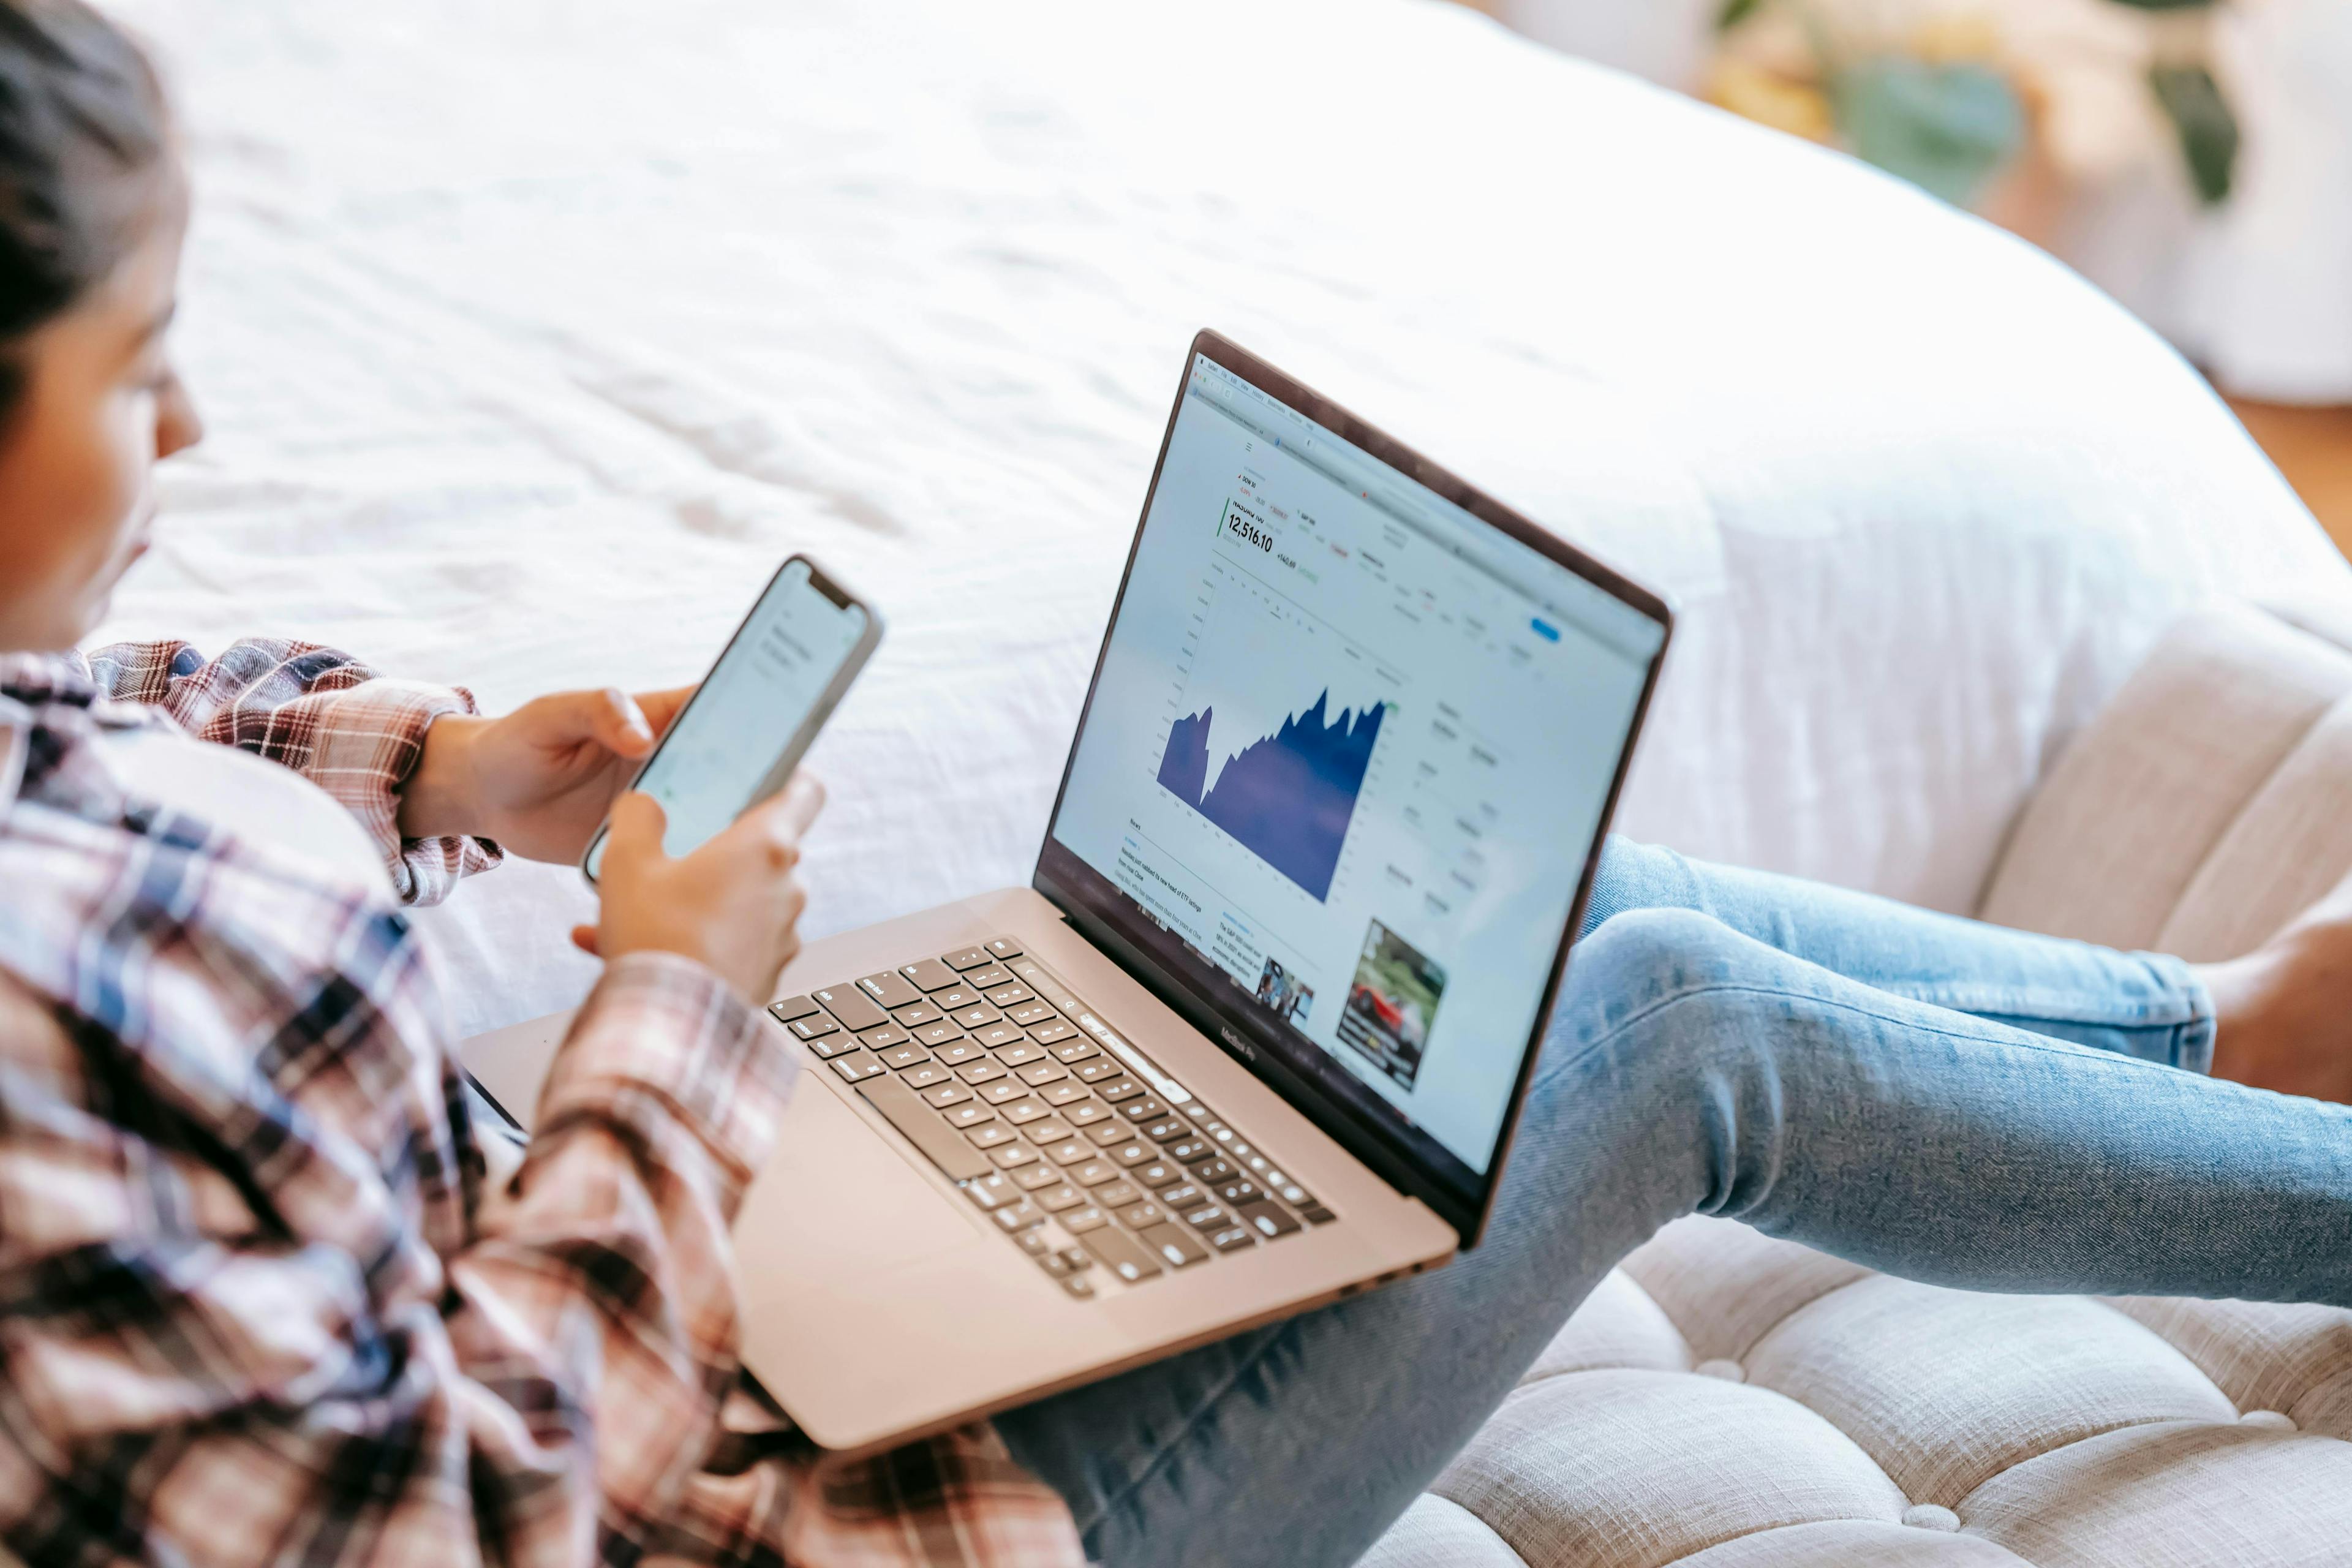 A person lounging on a bed is checking their phone while viewing graphs on their laptop screen, symbolizing influencer marketing services.